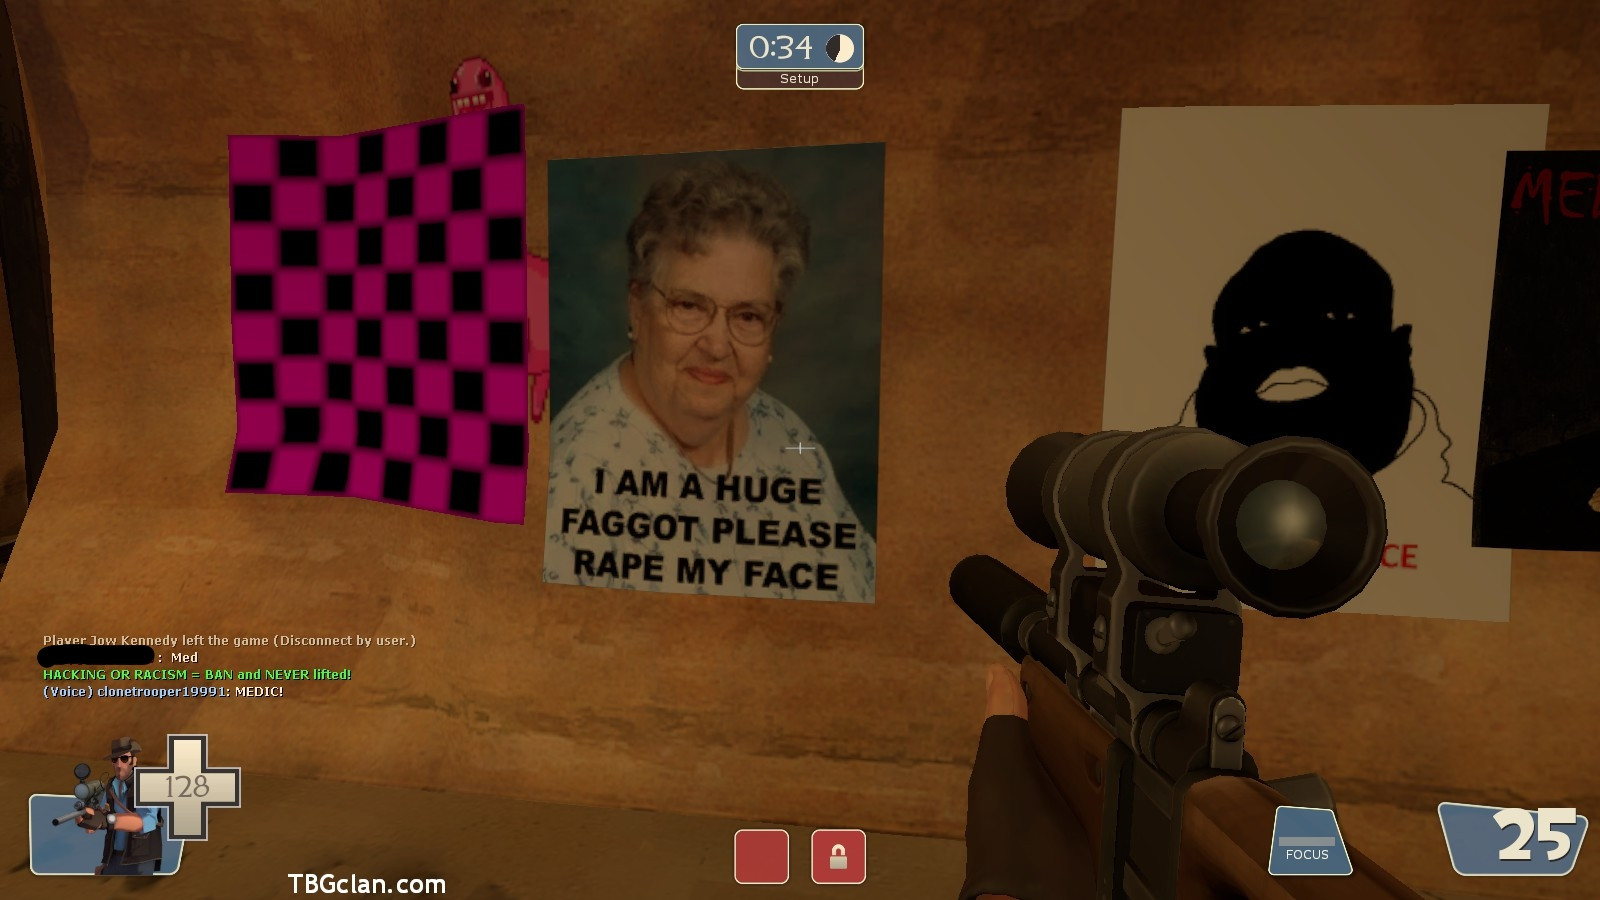 Team fortress 2 maturity at its best